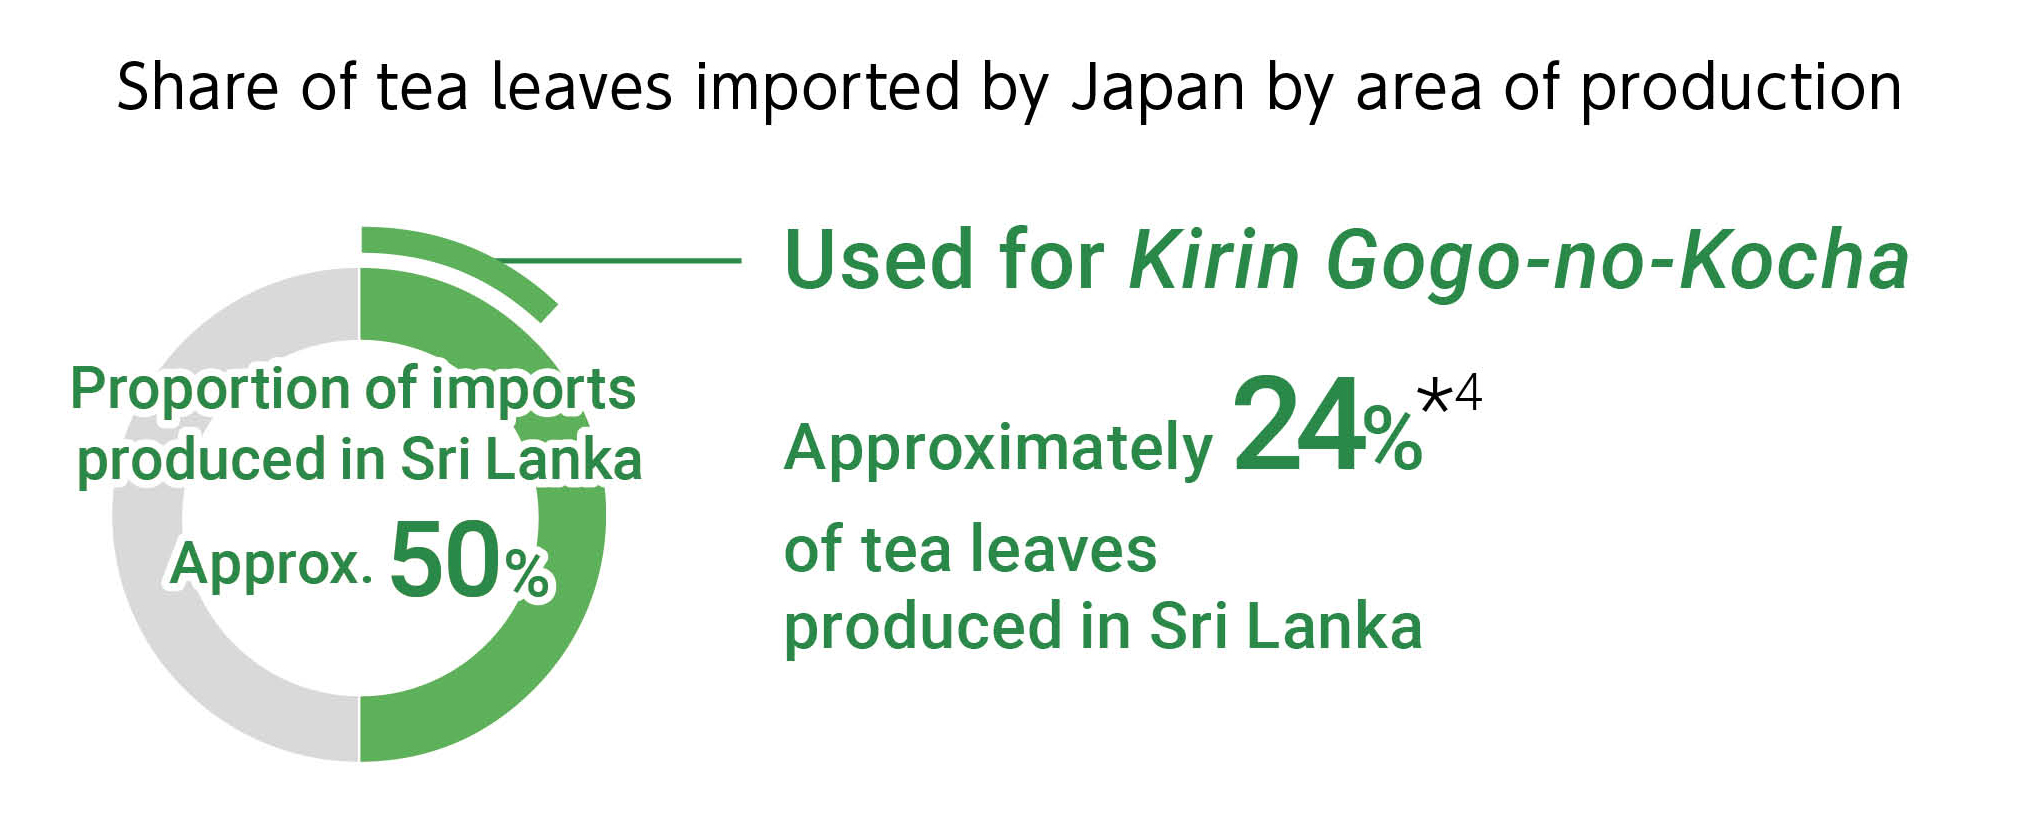 Share of tea leaves imported by Japan by area of production